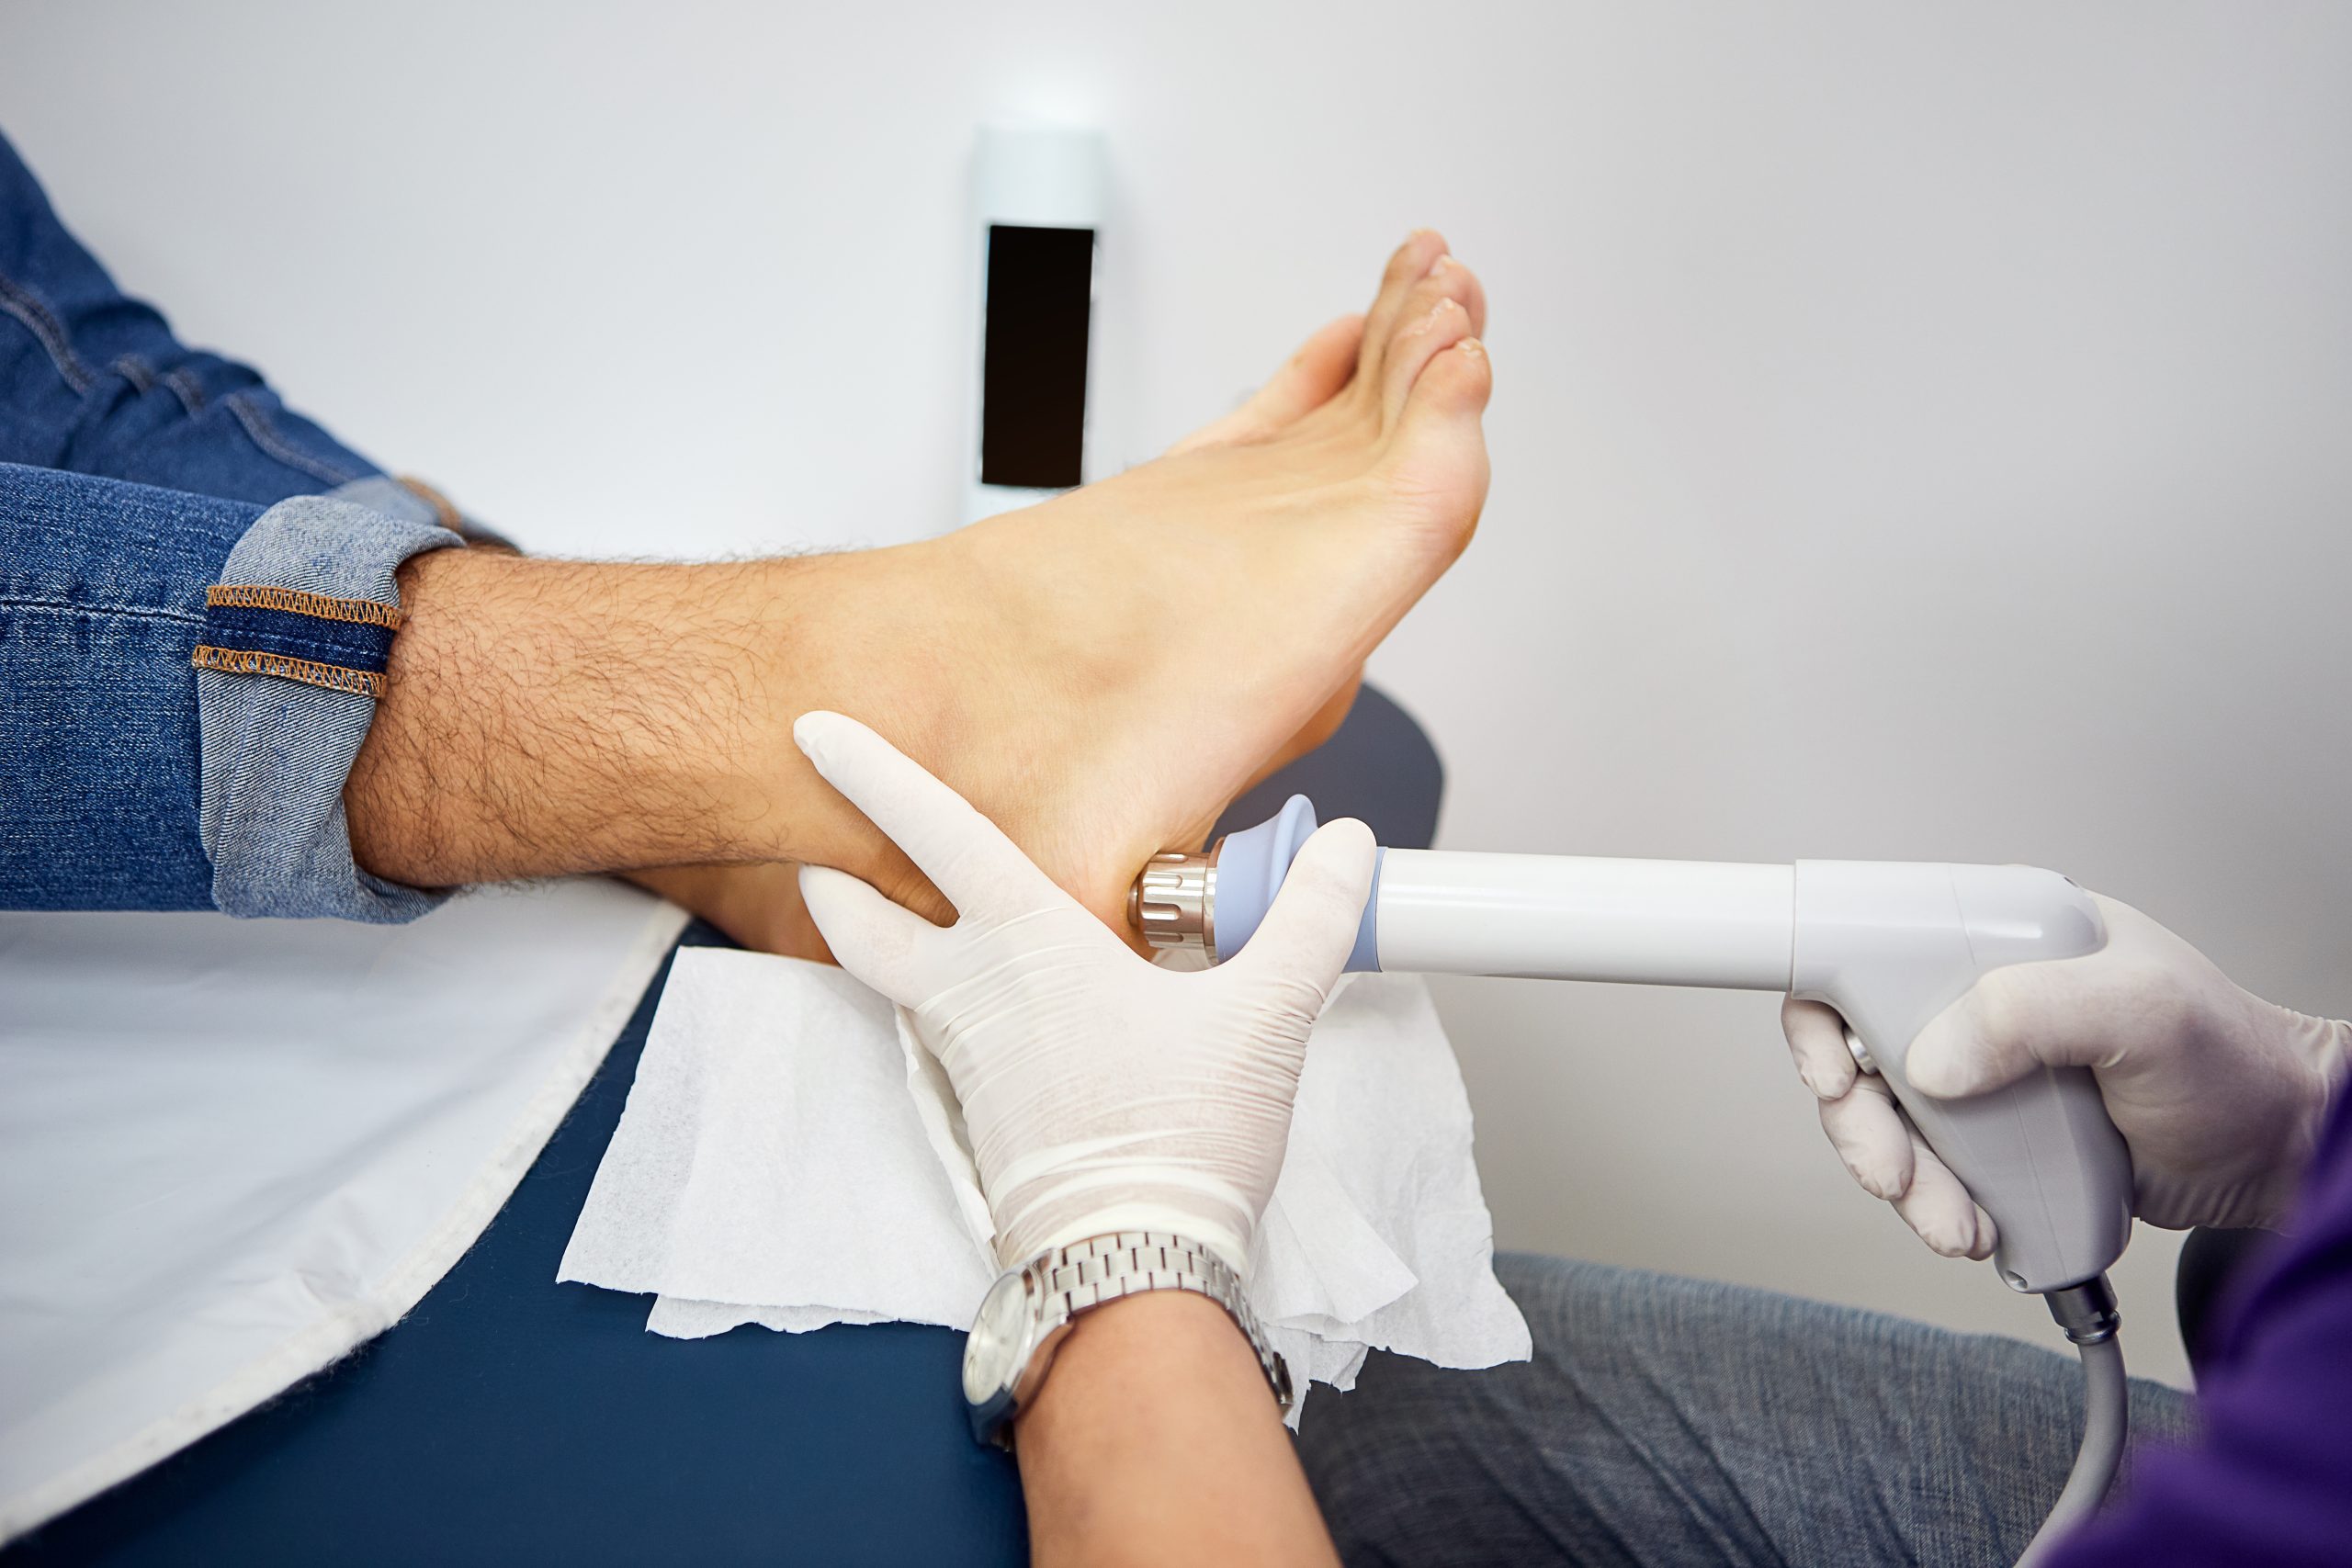 Can a physiotherapist help with plantar fasciitis?